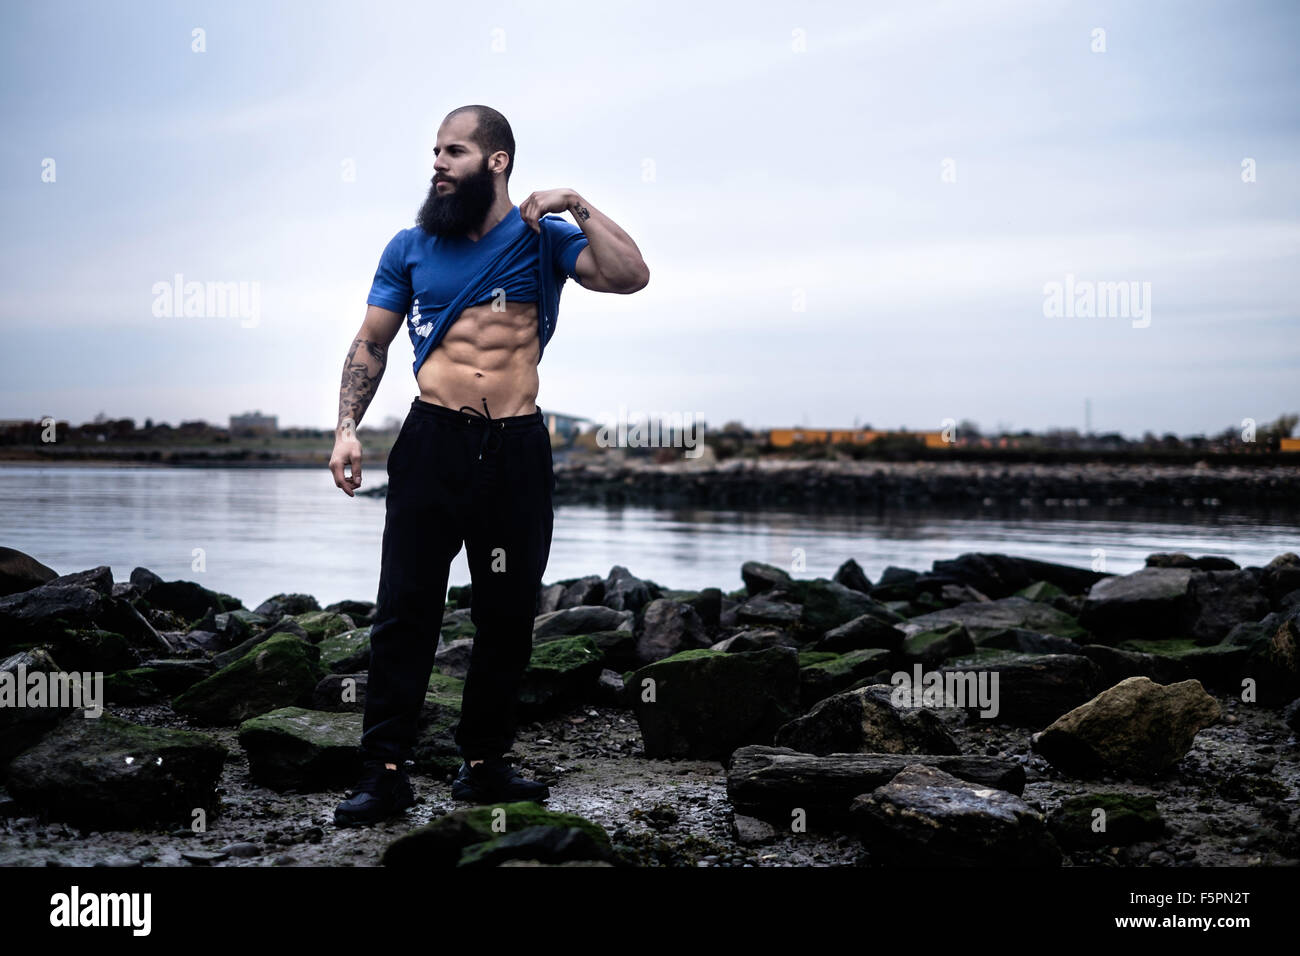 Man with a beard lifts his shirt to reveal abdominal muscles on a rocky beach. Stock Photo